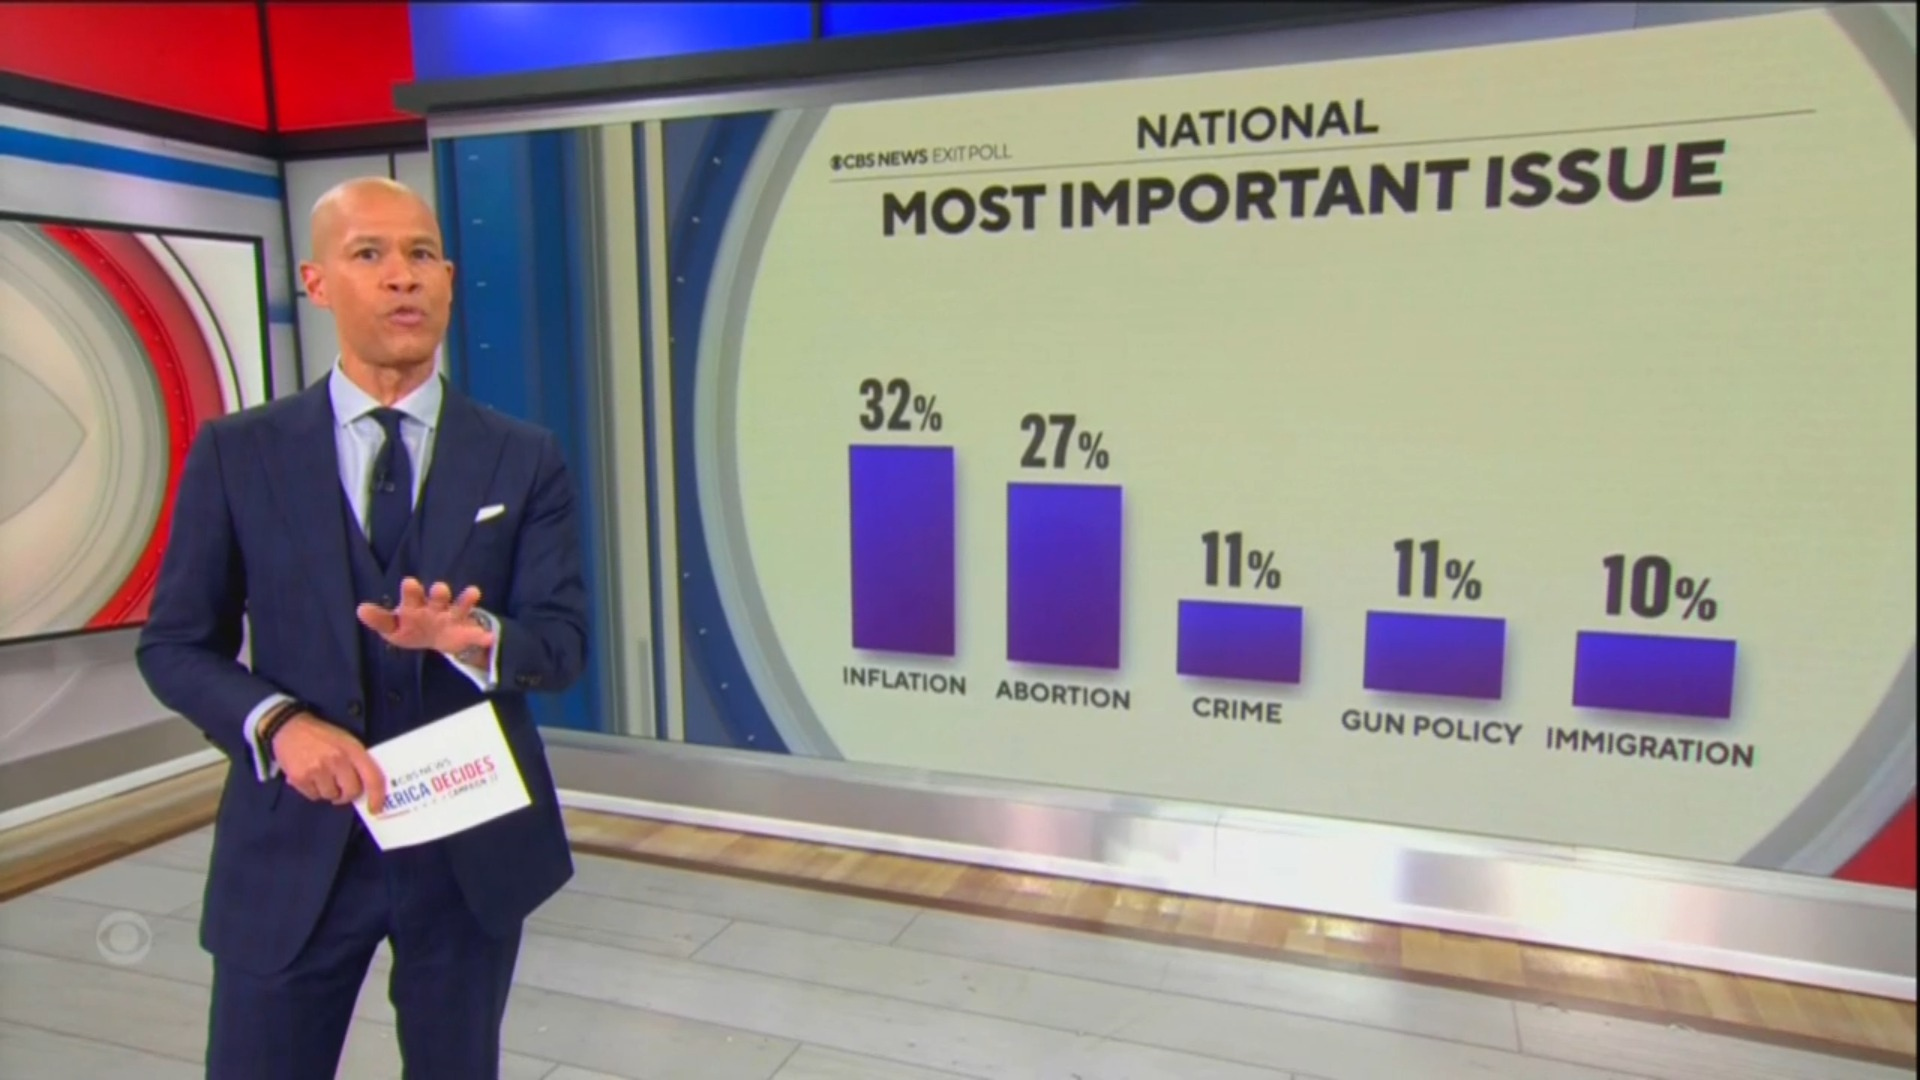 Watch Cbs Evening News First Cbs News Exit Polls Released In Midterms 3157